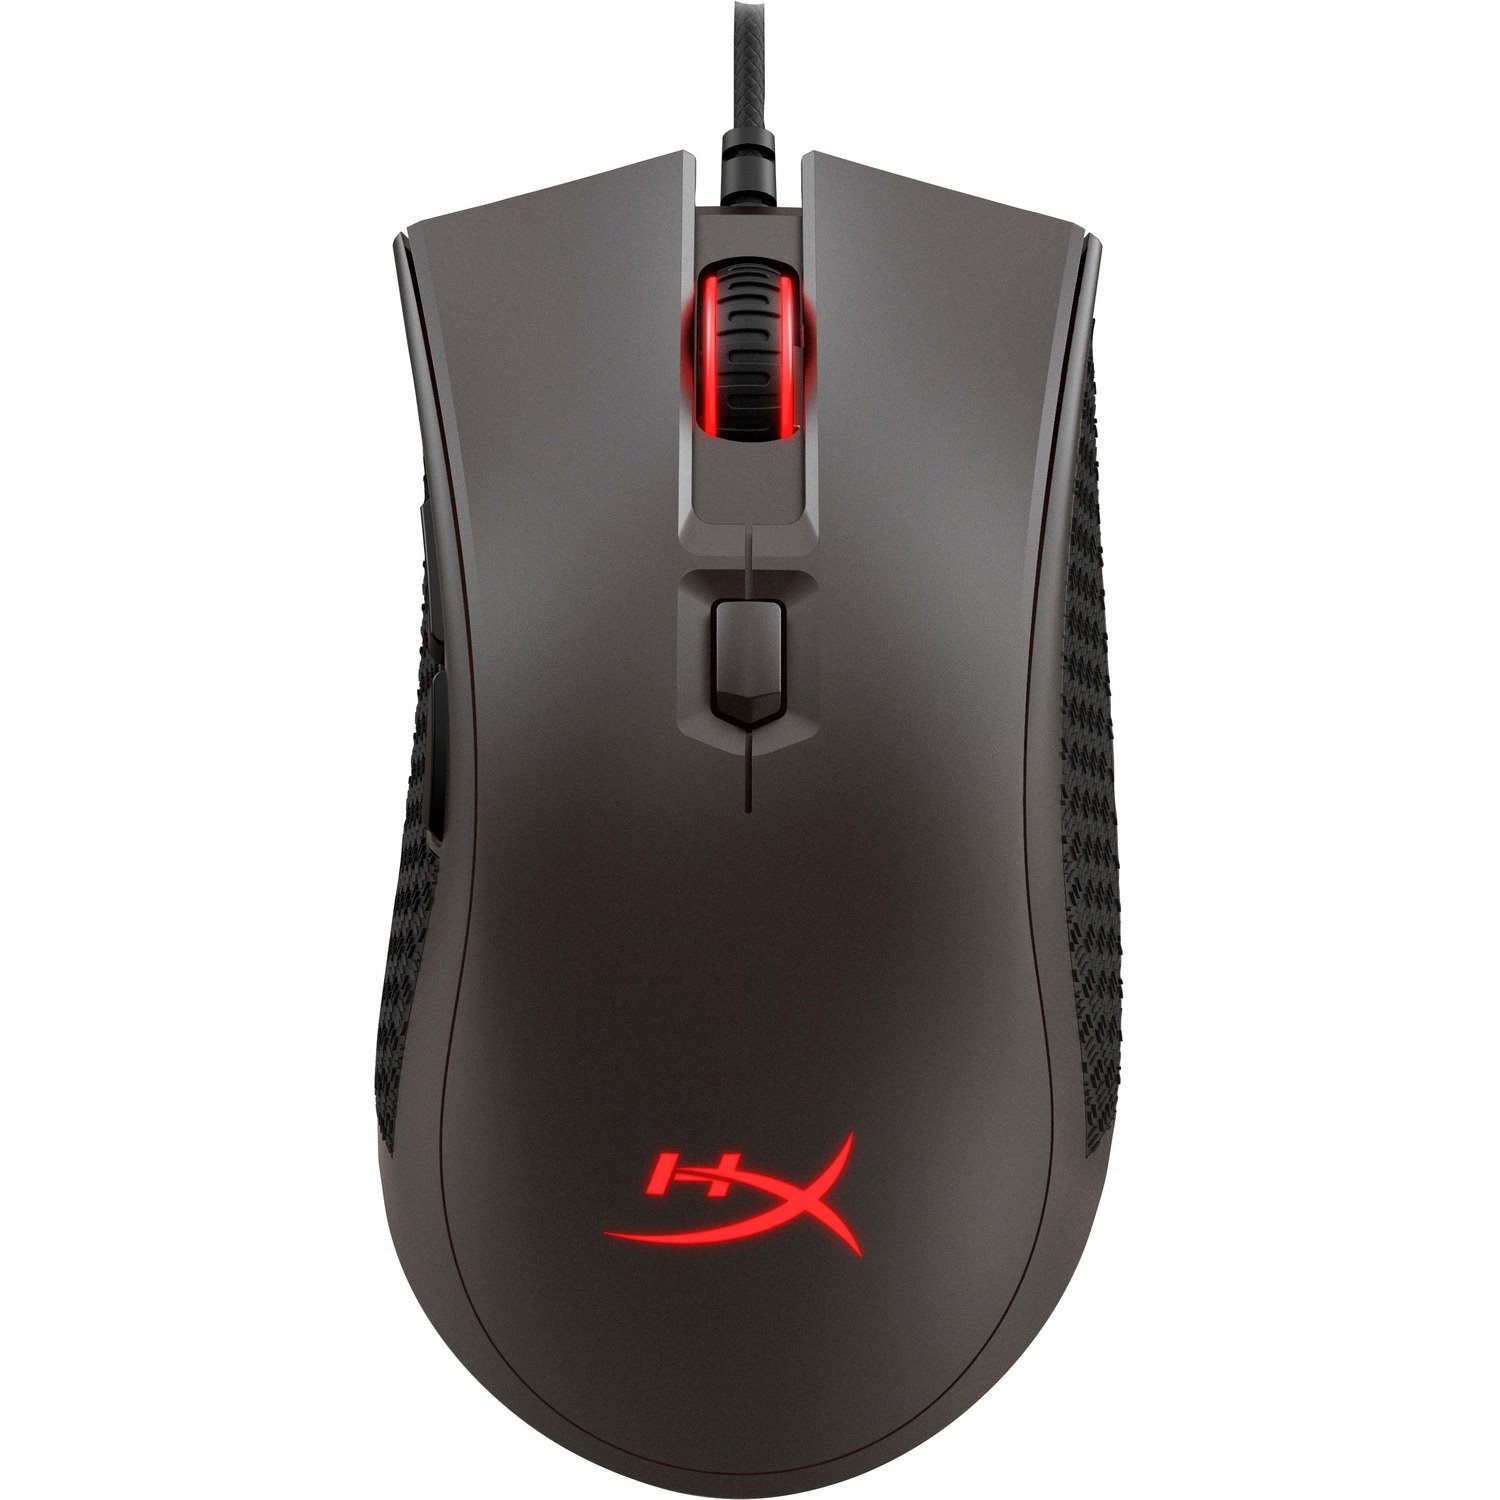 HP Gaming Mouse - USB 2.0 - Optical - 6 Button(s) - 6 Programmable Button(s) - Gunmetal, Black